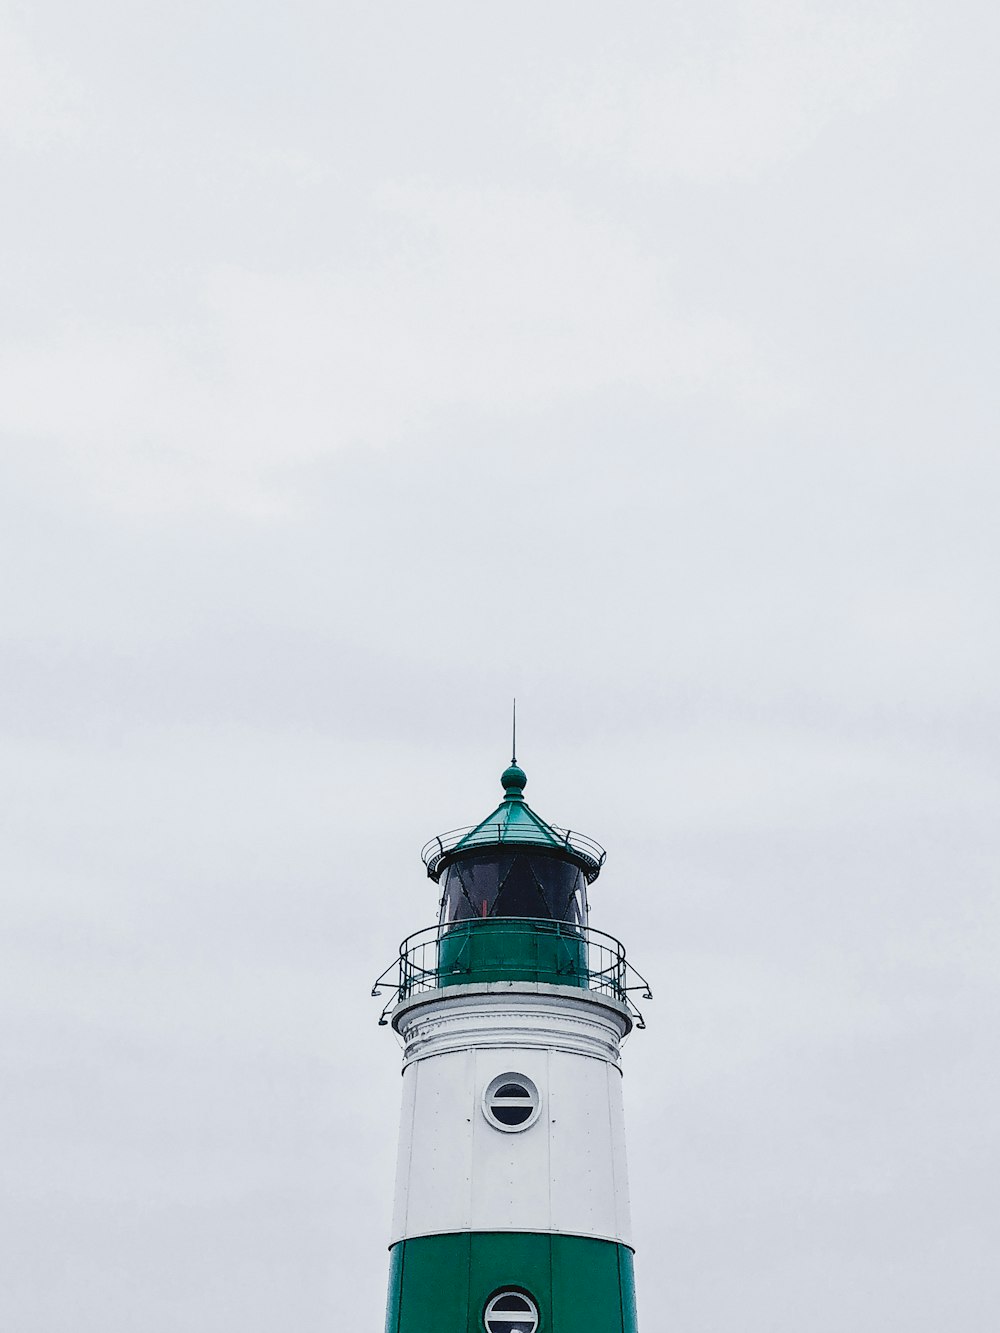 white and green lighthouse under white sky during daytime